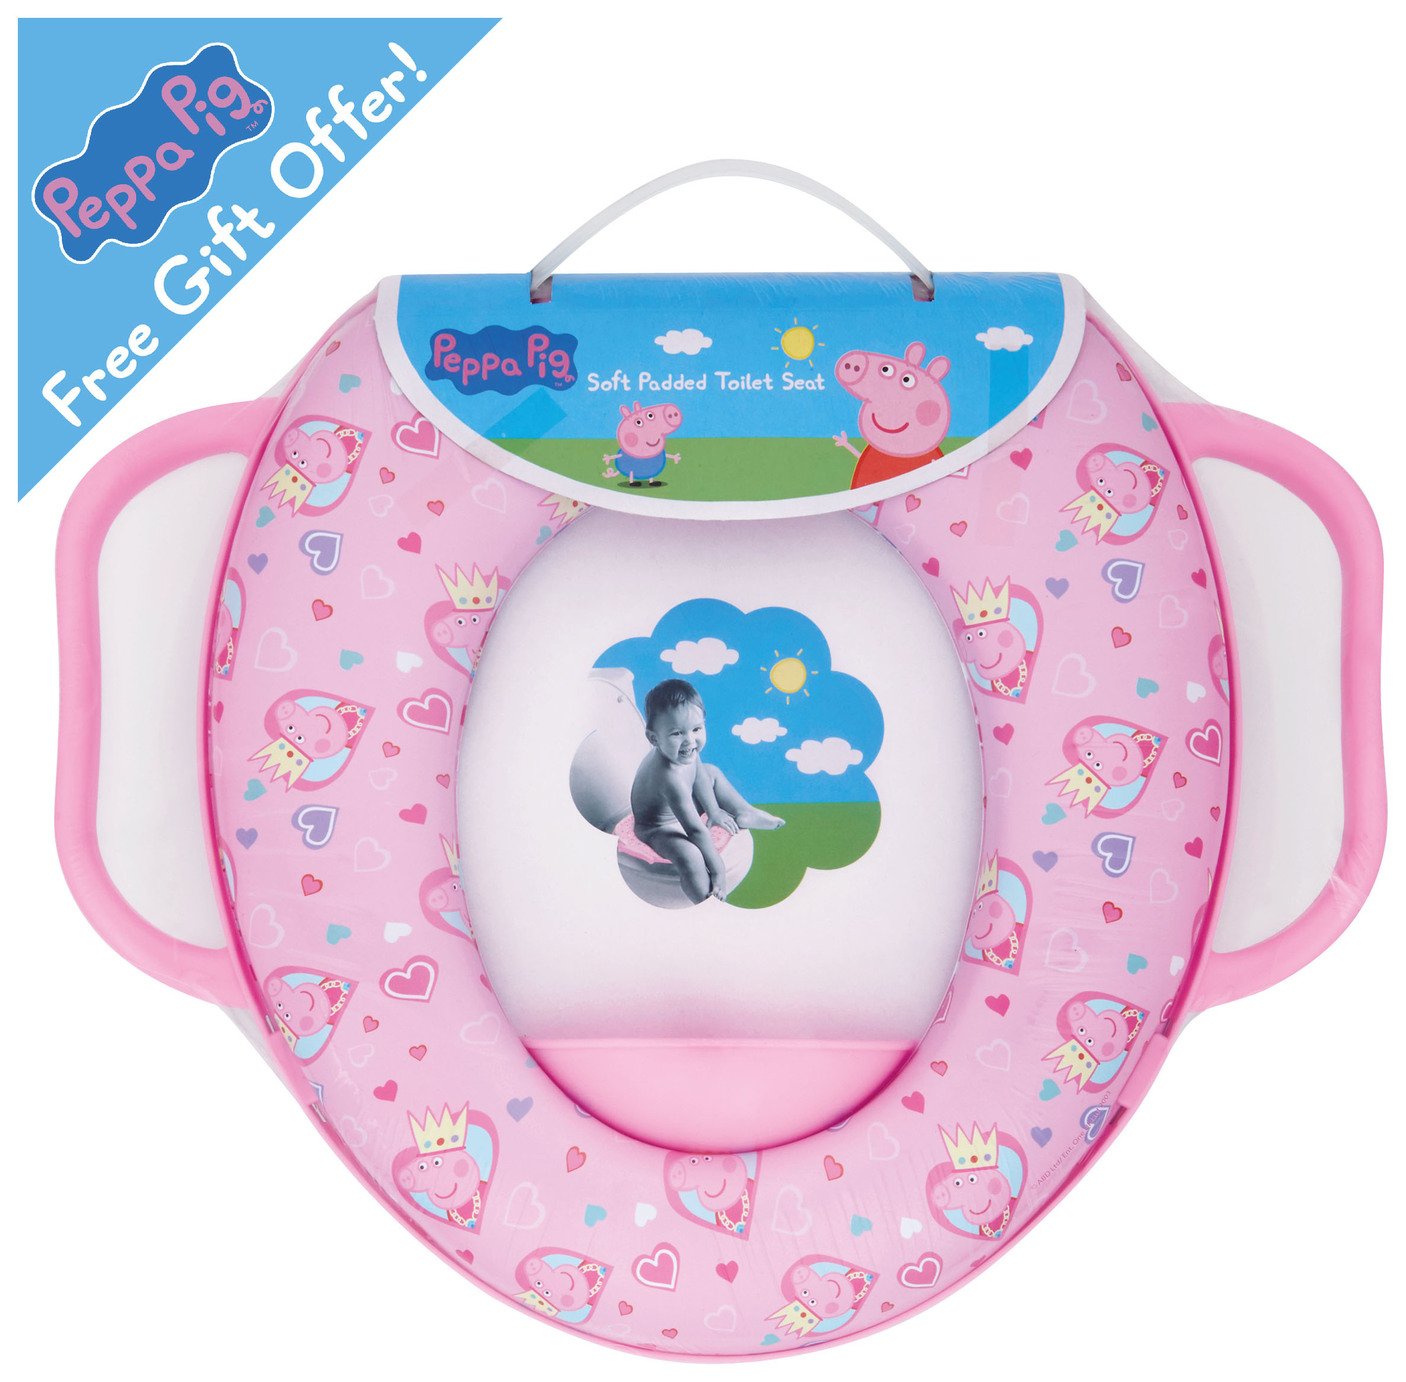 Peppa Pig Soft Padded Toilet Trainer Seat Review